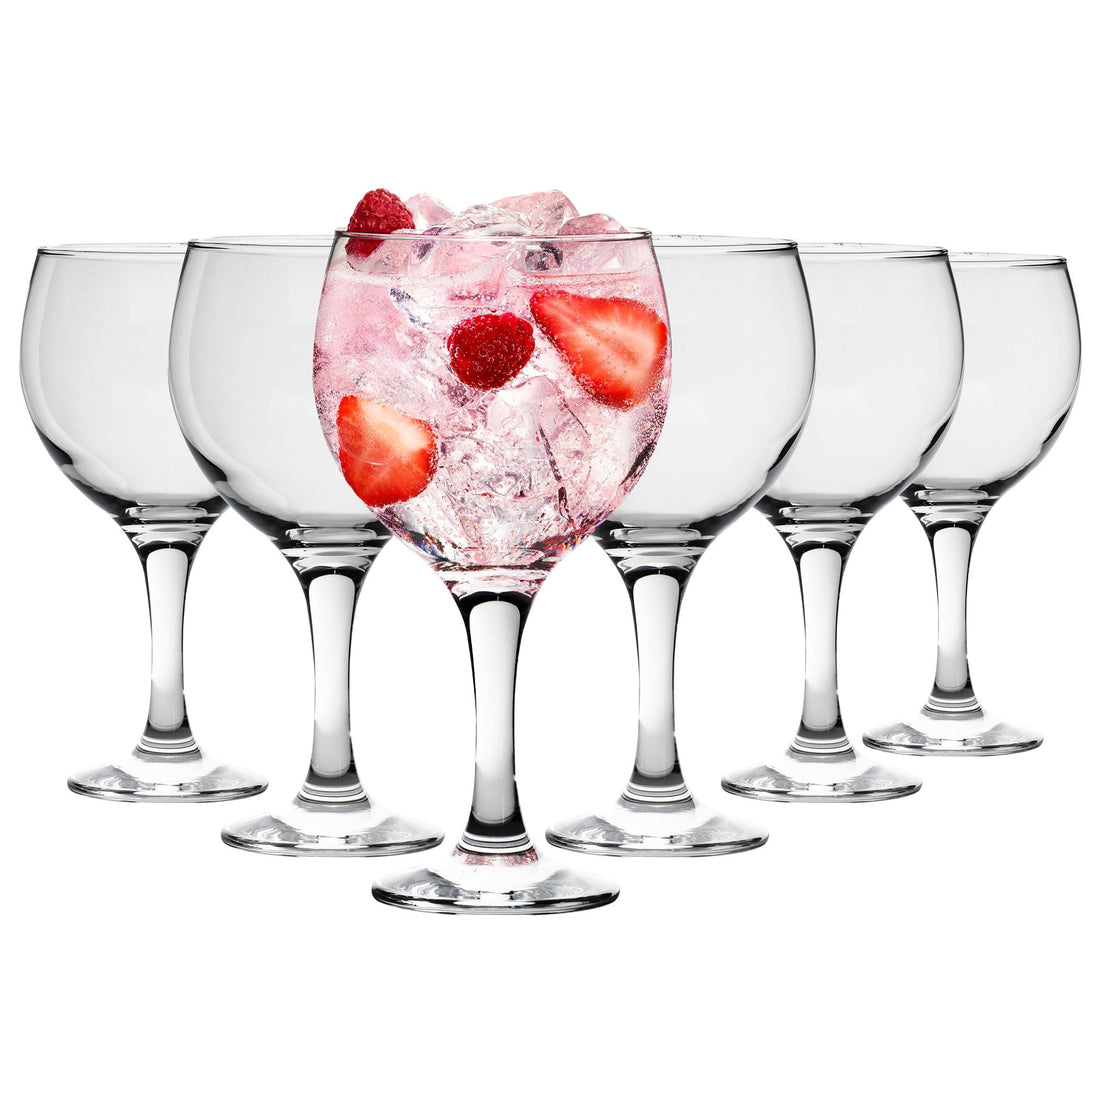 Rink Drink Spanish Gin Glasses - 645ml - Pack of 6